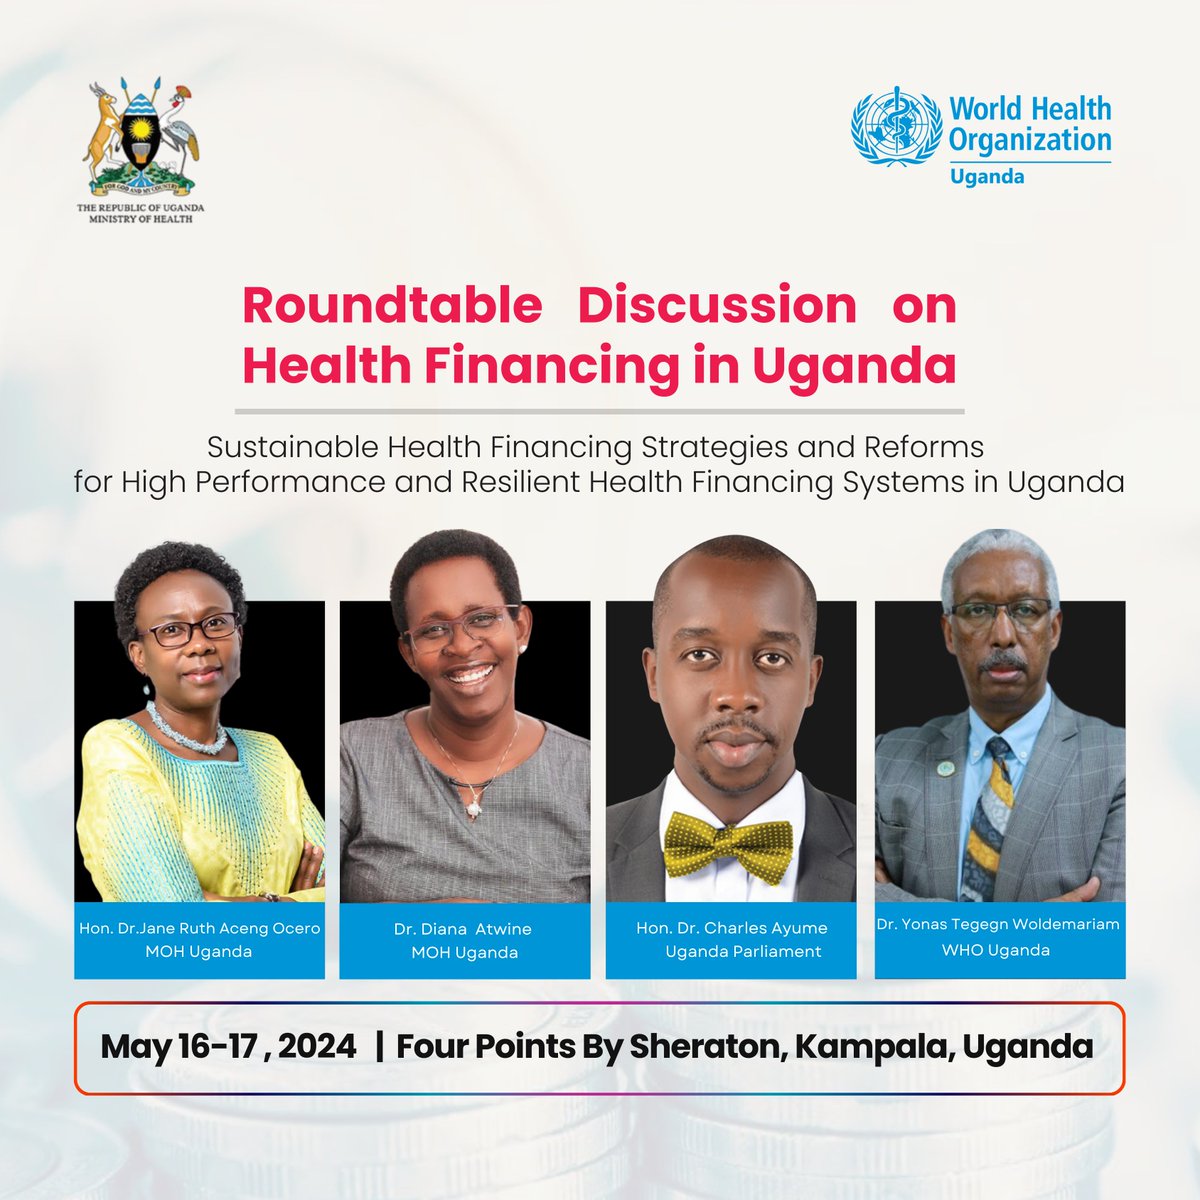 Join @MinofHealthUG & @WHOUganda on May 16-17, 2024, for a Roundtable discussion on Health Financing in Uganda. Discussions will focus on adaptive, sustainable, & resilient health financing reforms in line with national health policies, budget processes, & financial management.